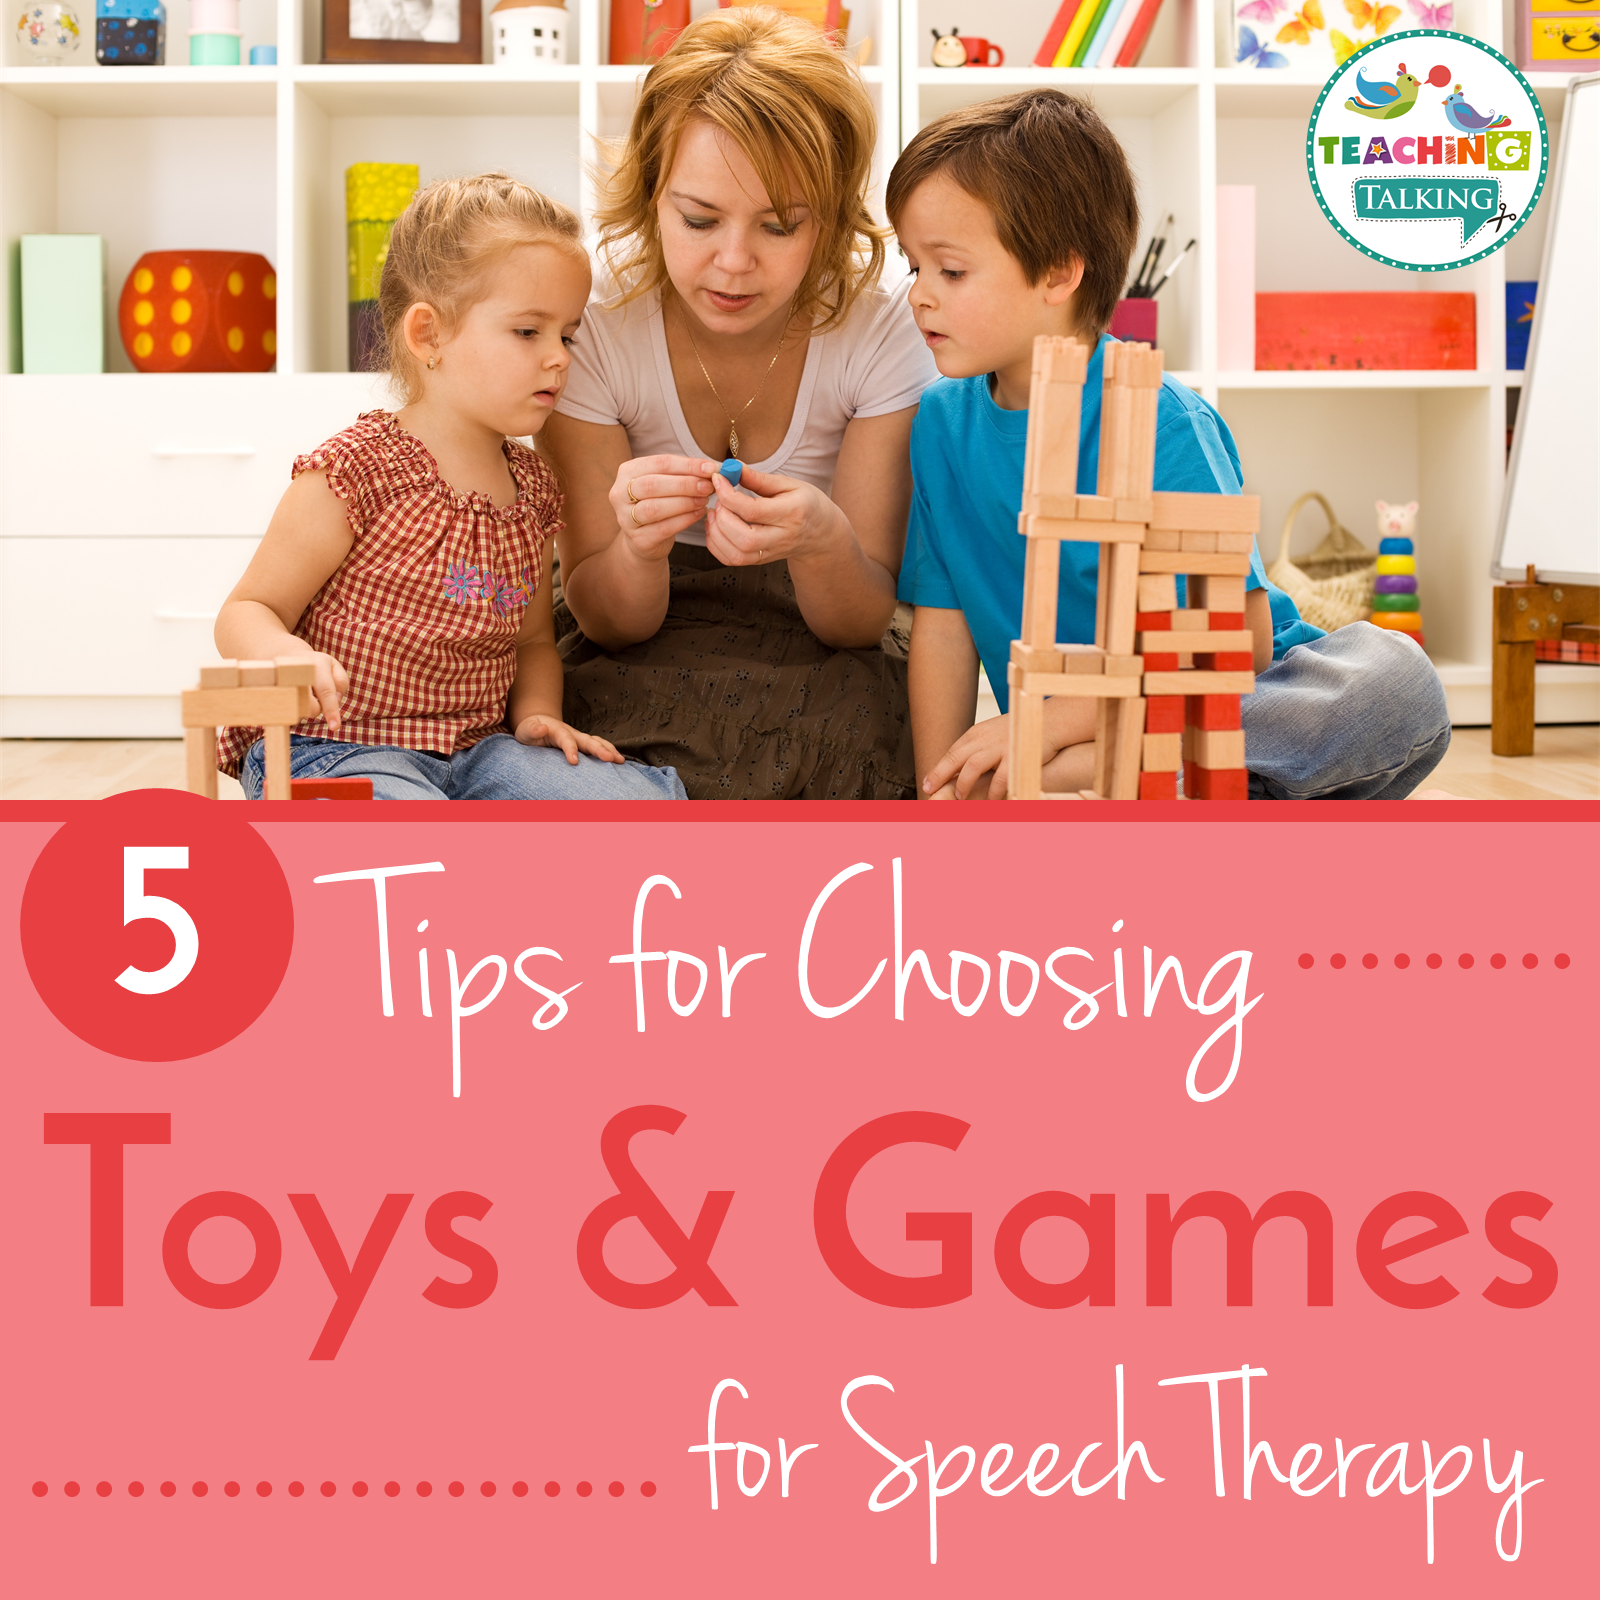 How to choose toys and games for speech therapy